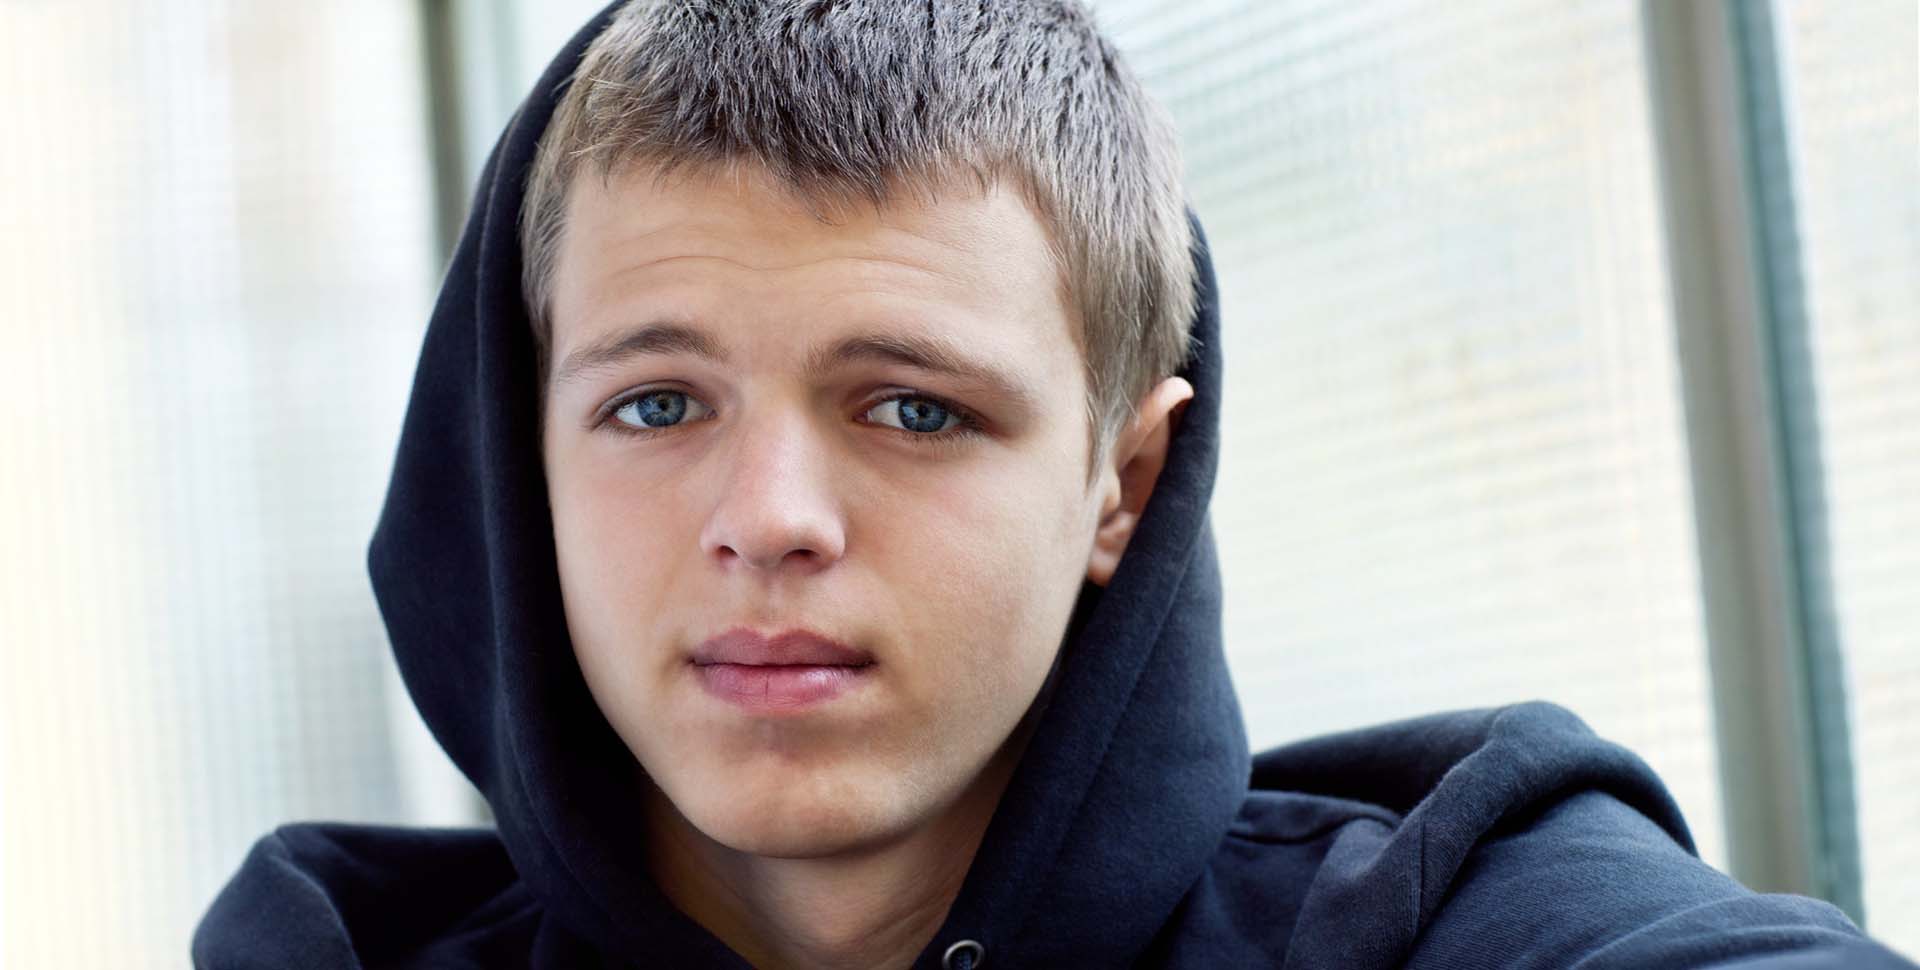 Child protection image of young person